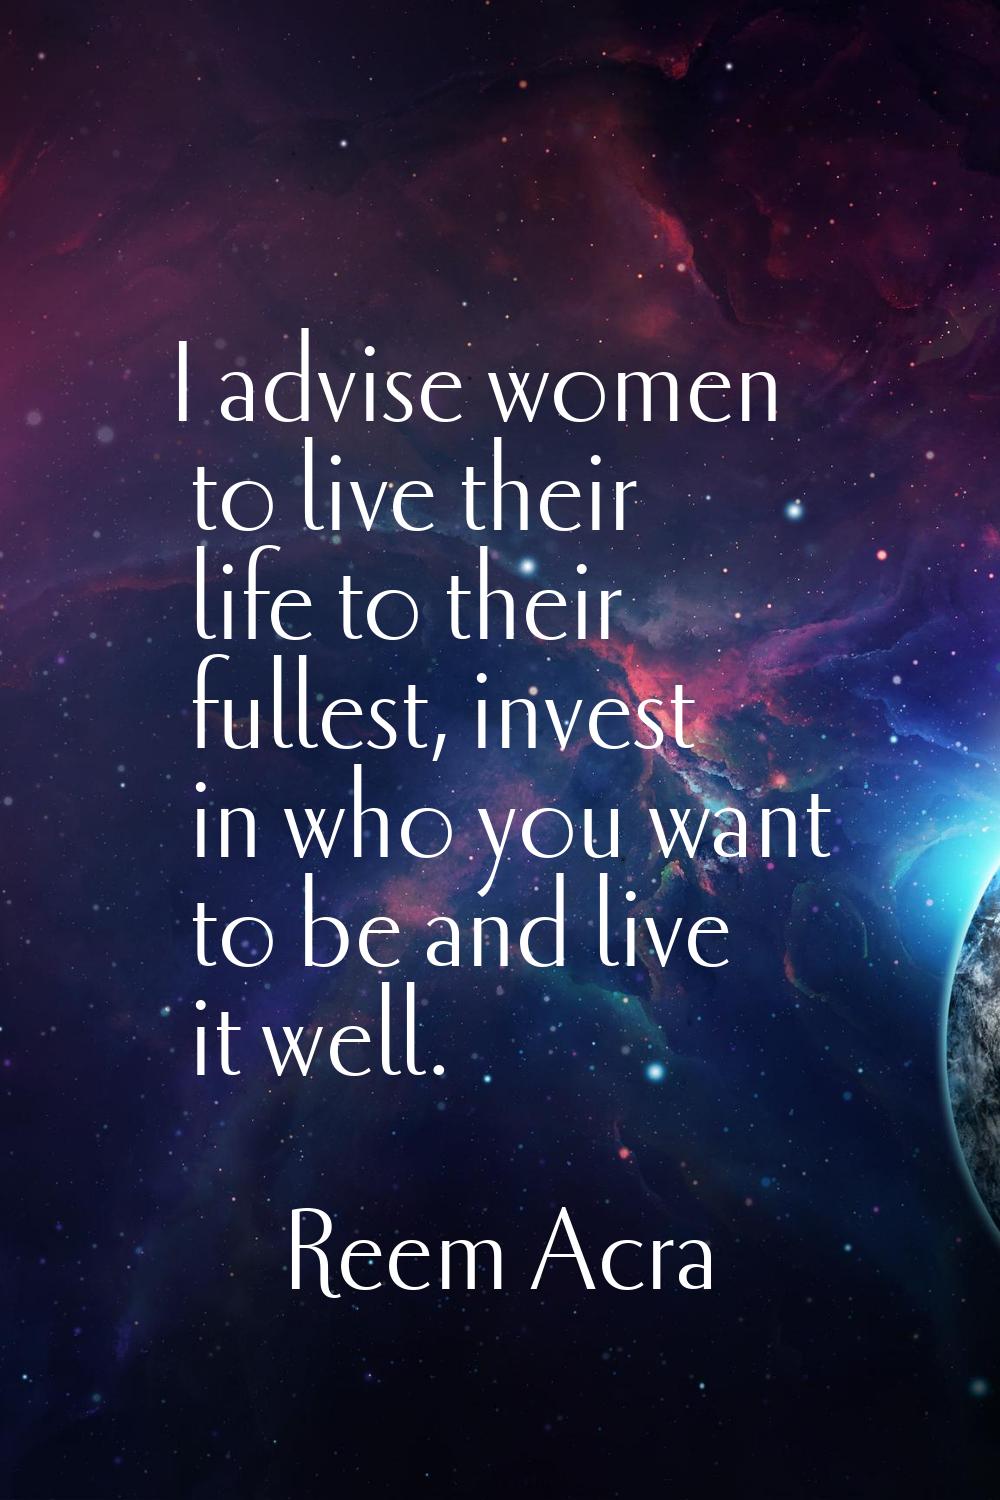 I advise women to live their life to their fullest, invest in who you want to be and live it well.